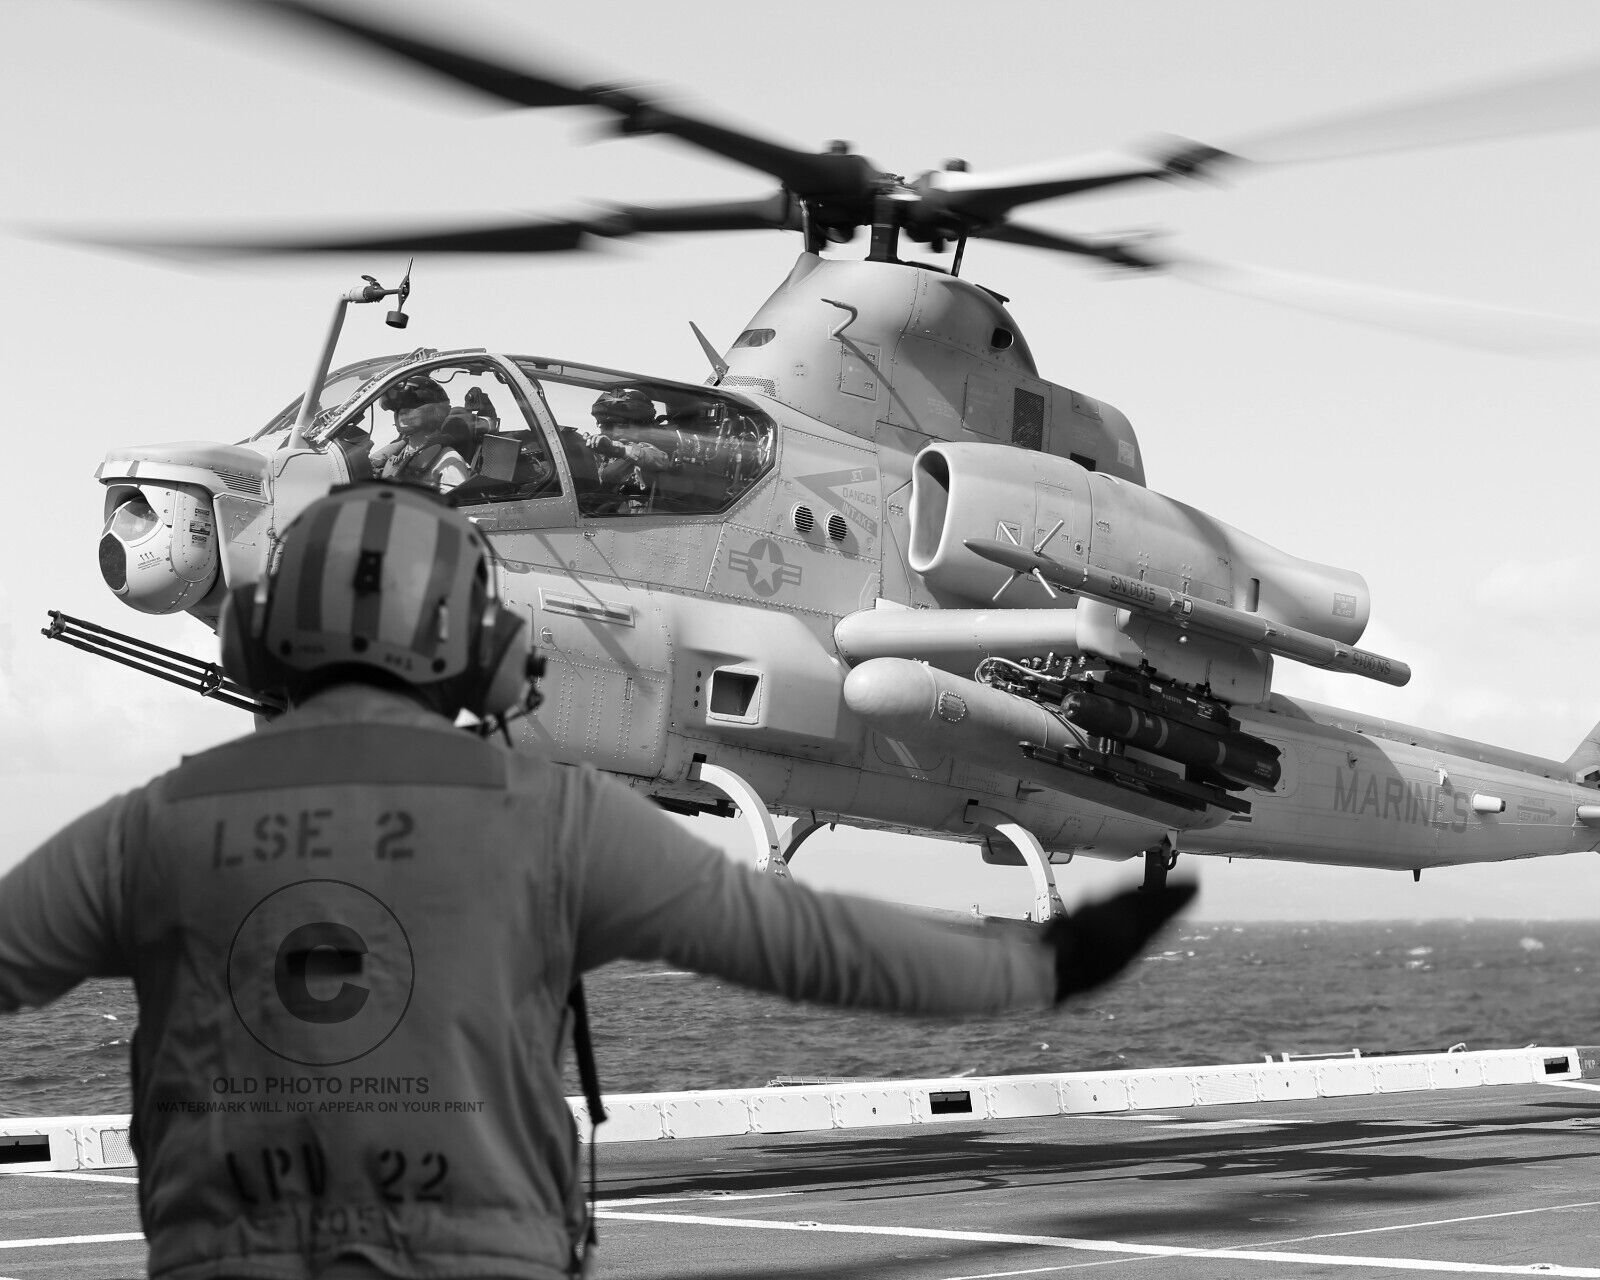 AH-1Z Viper Helicopter 2014 Photo Amphibious Transport Dock USS San Diego LPD 22